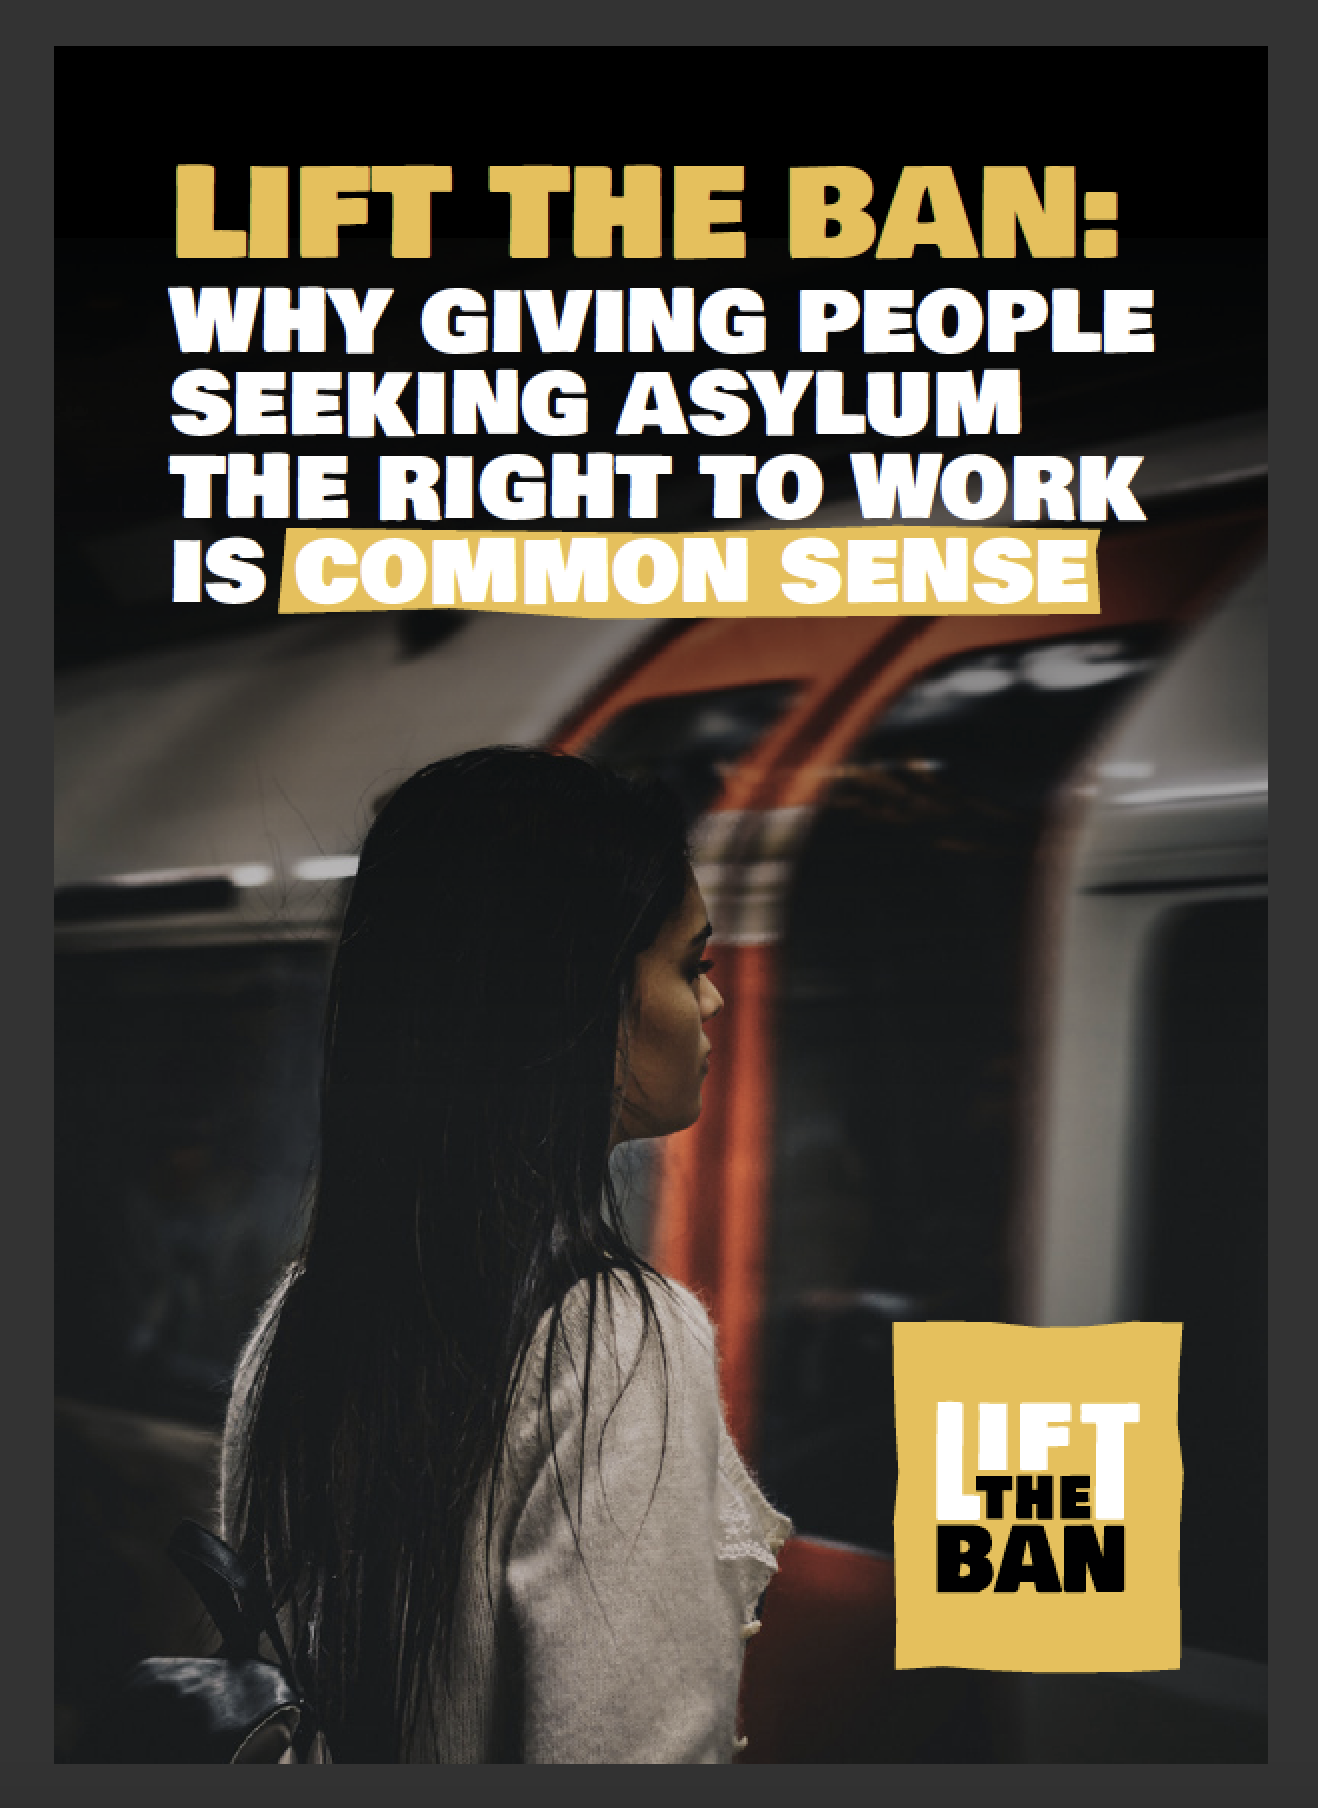 Lift the ban: why giving people seeking asylum the right to work is common sense